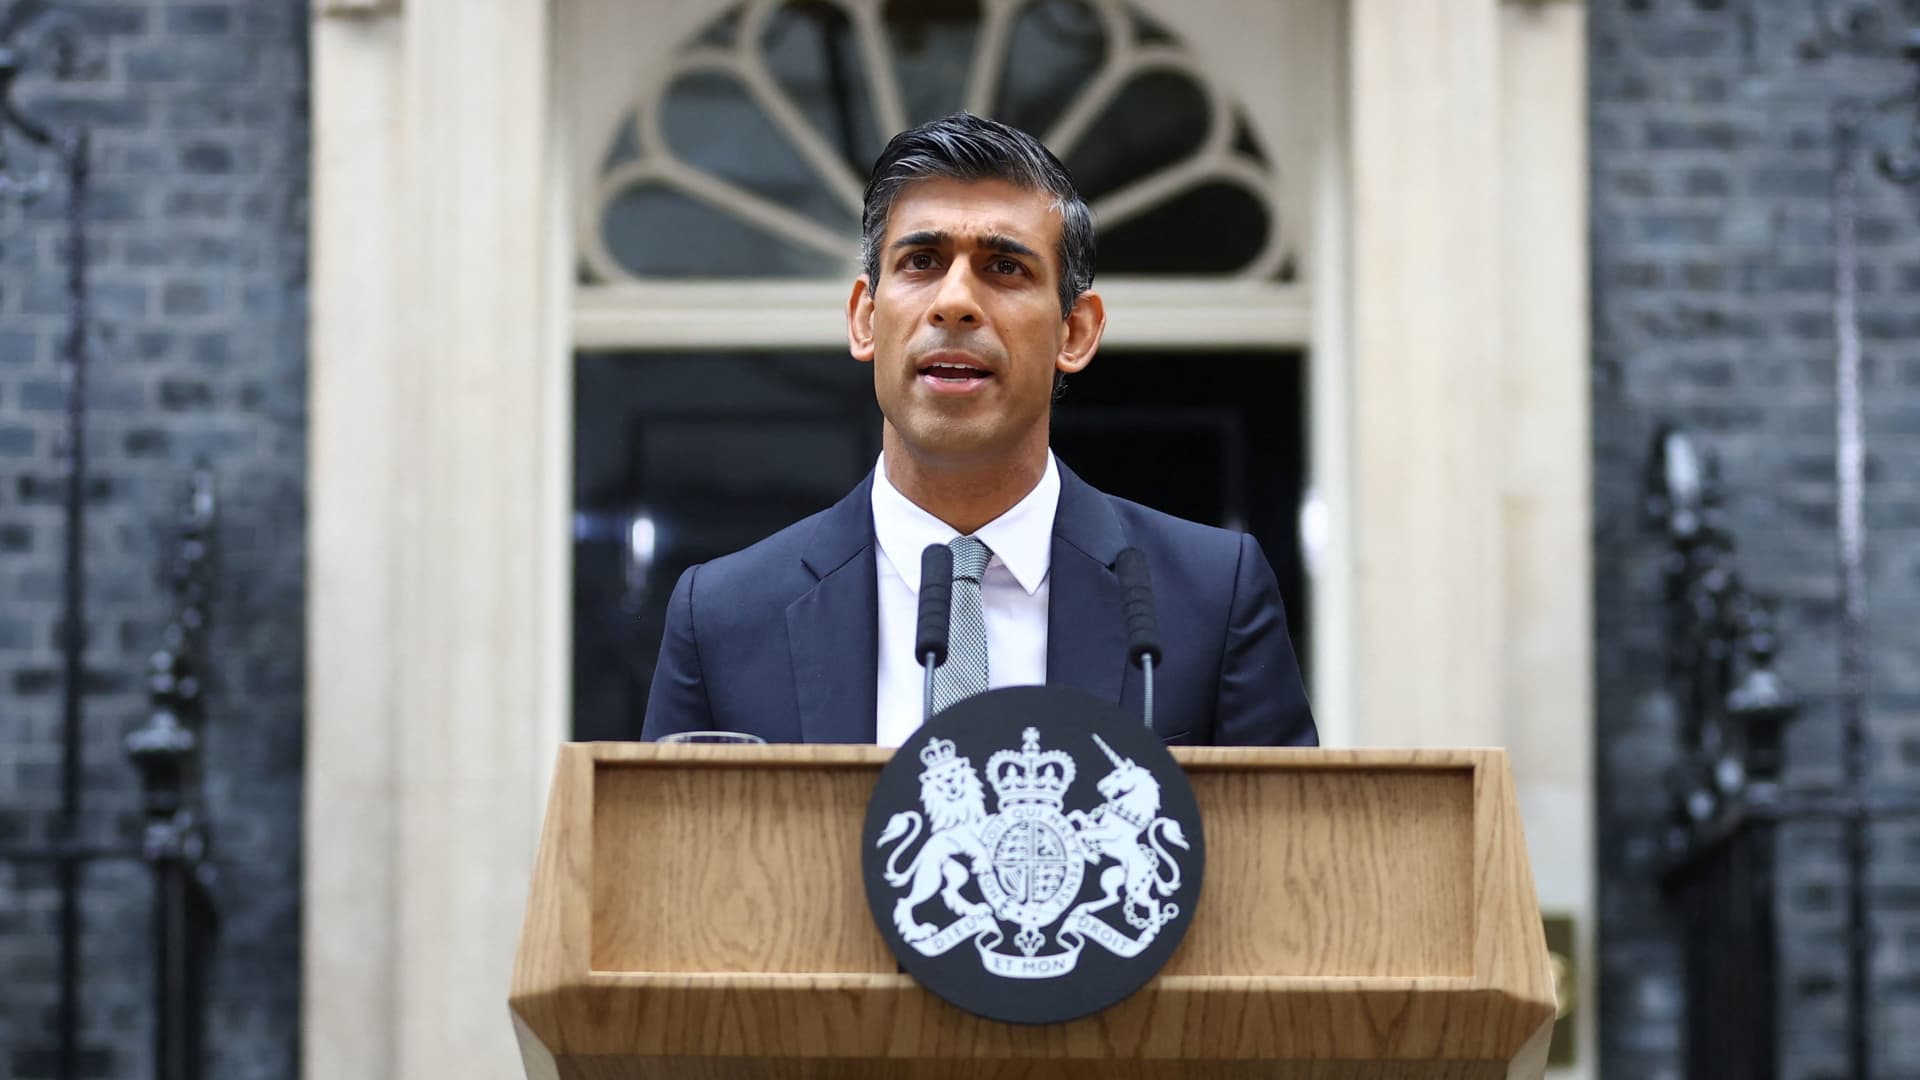 Britain's new Prime Minister Rishi Sunak delivers a speech outside No. 10 Downing Street in London on Oct. 25, 2022.